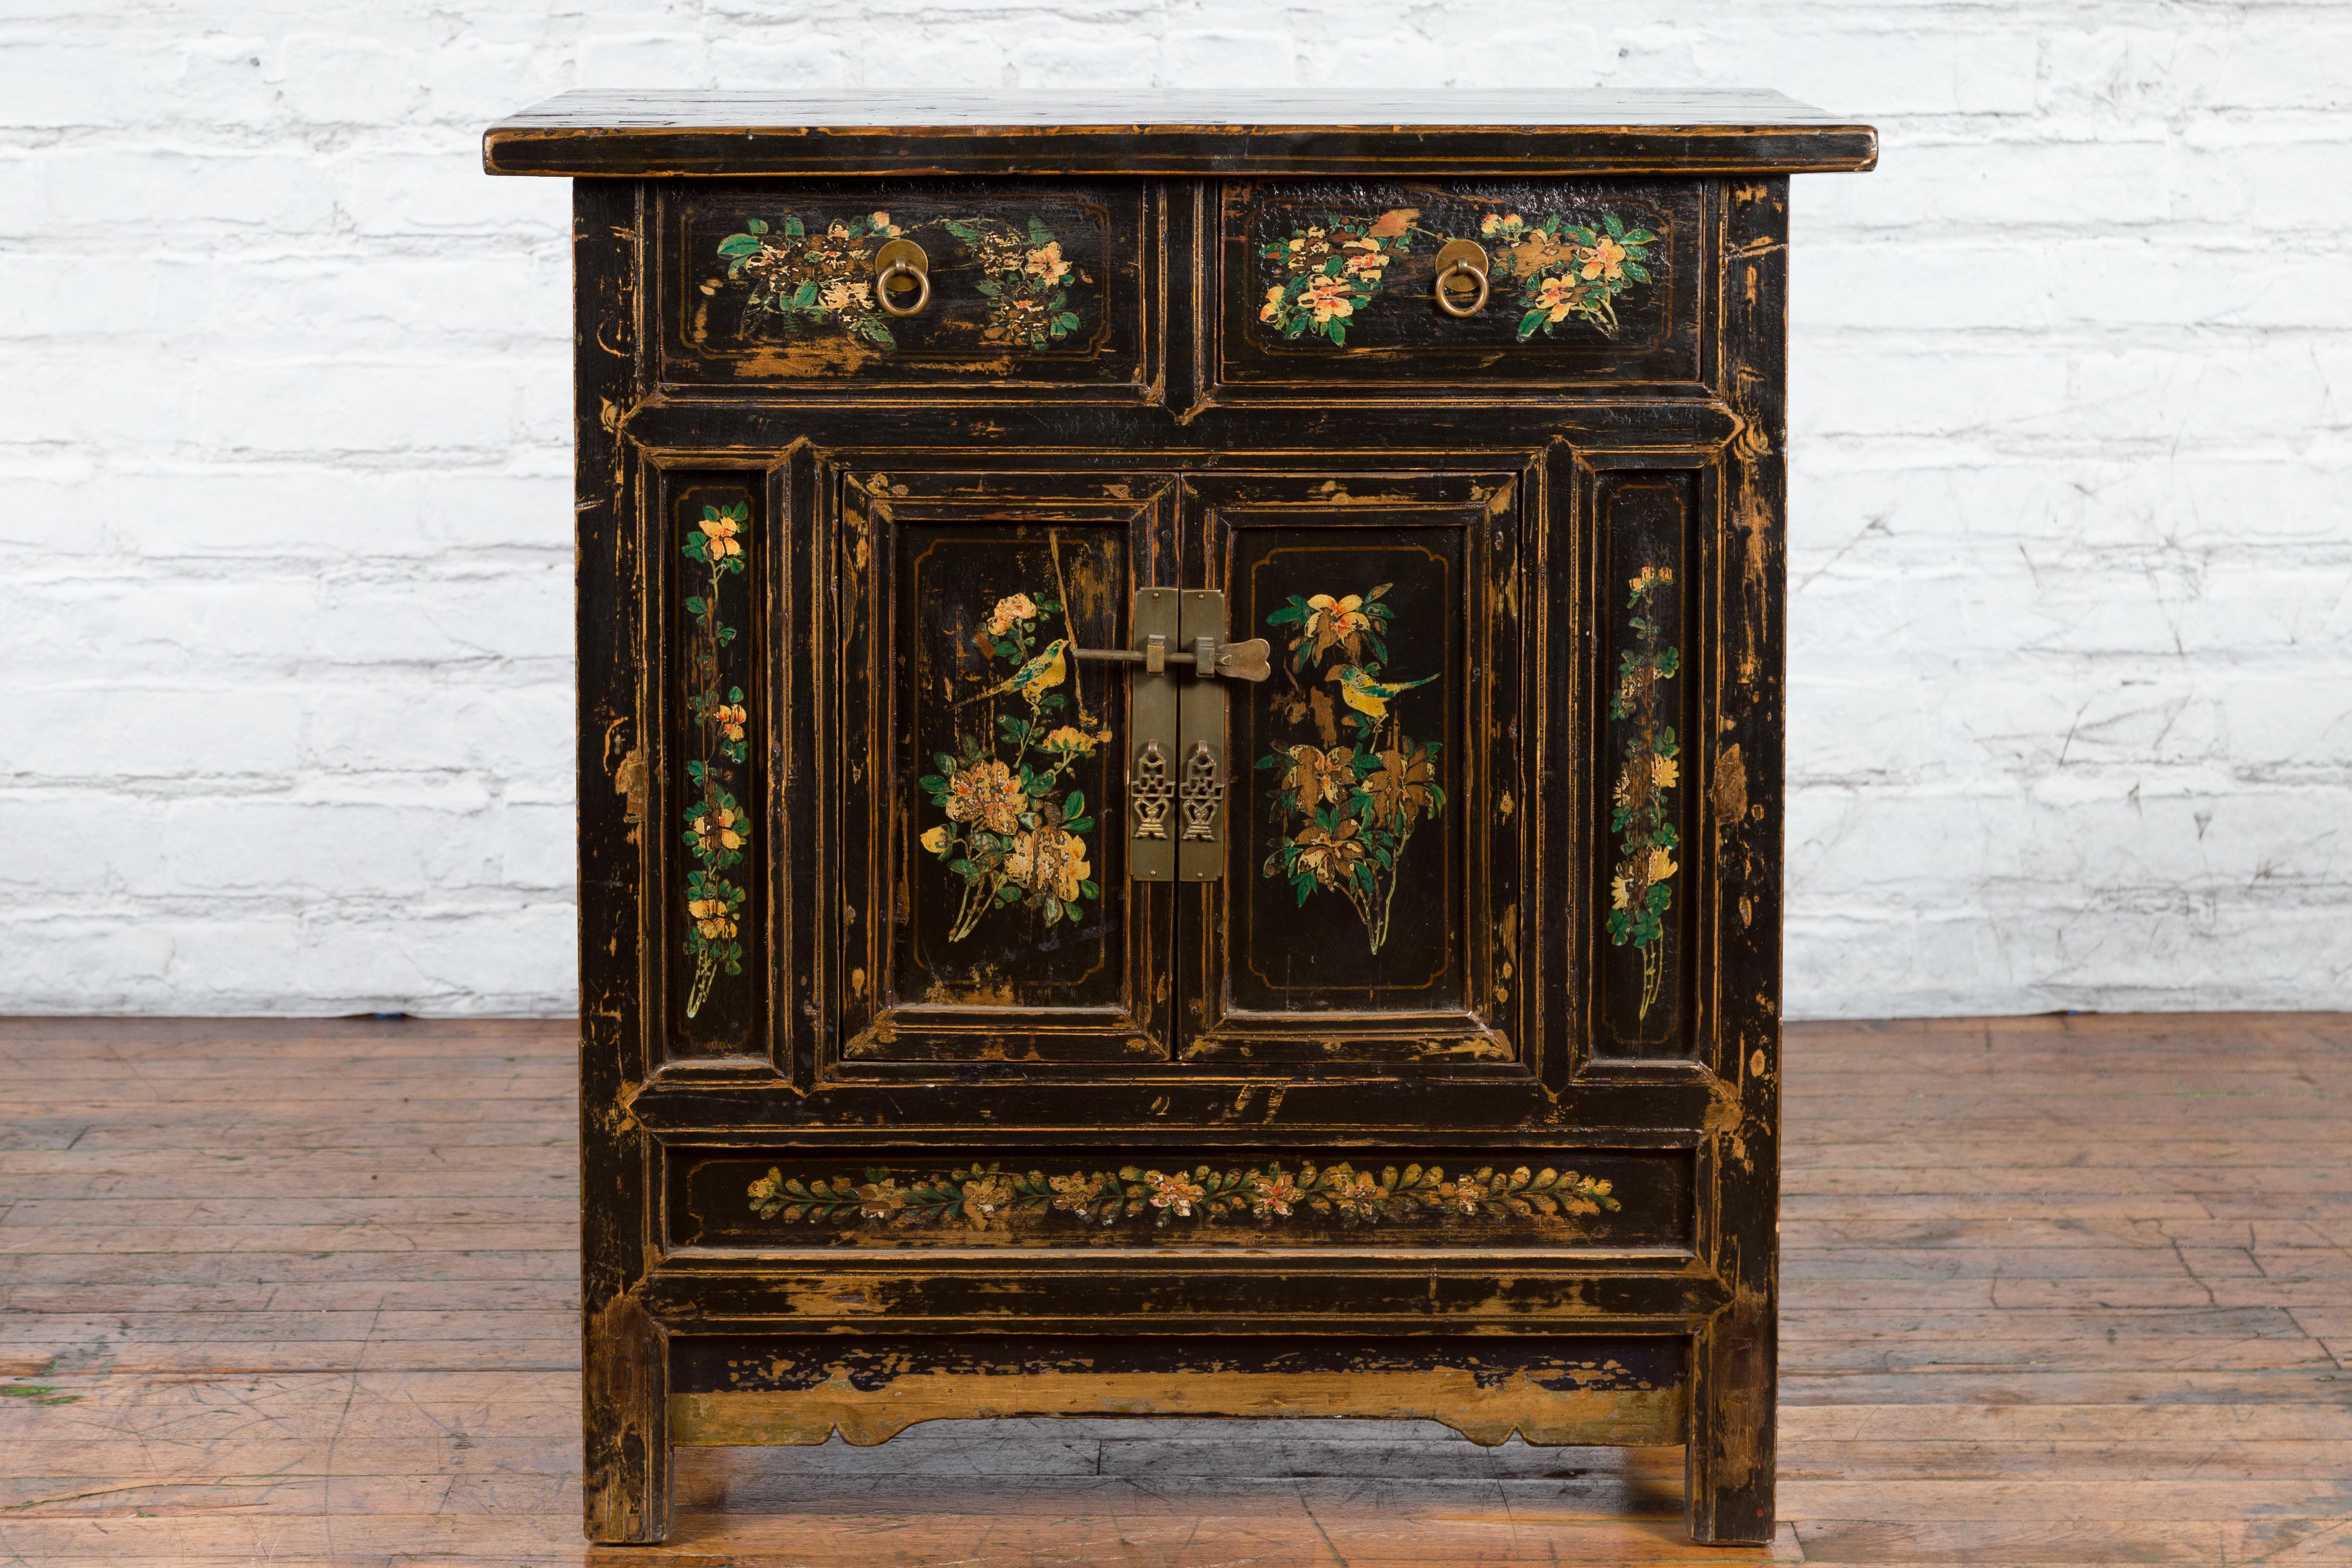 Chinese Qing Dynasty 19th Century Cabinet with Hand-Painted Floral Décor In Good Condition For Sale In Yonkers, NY